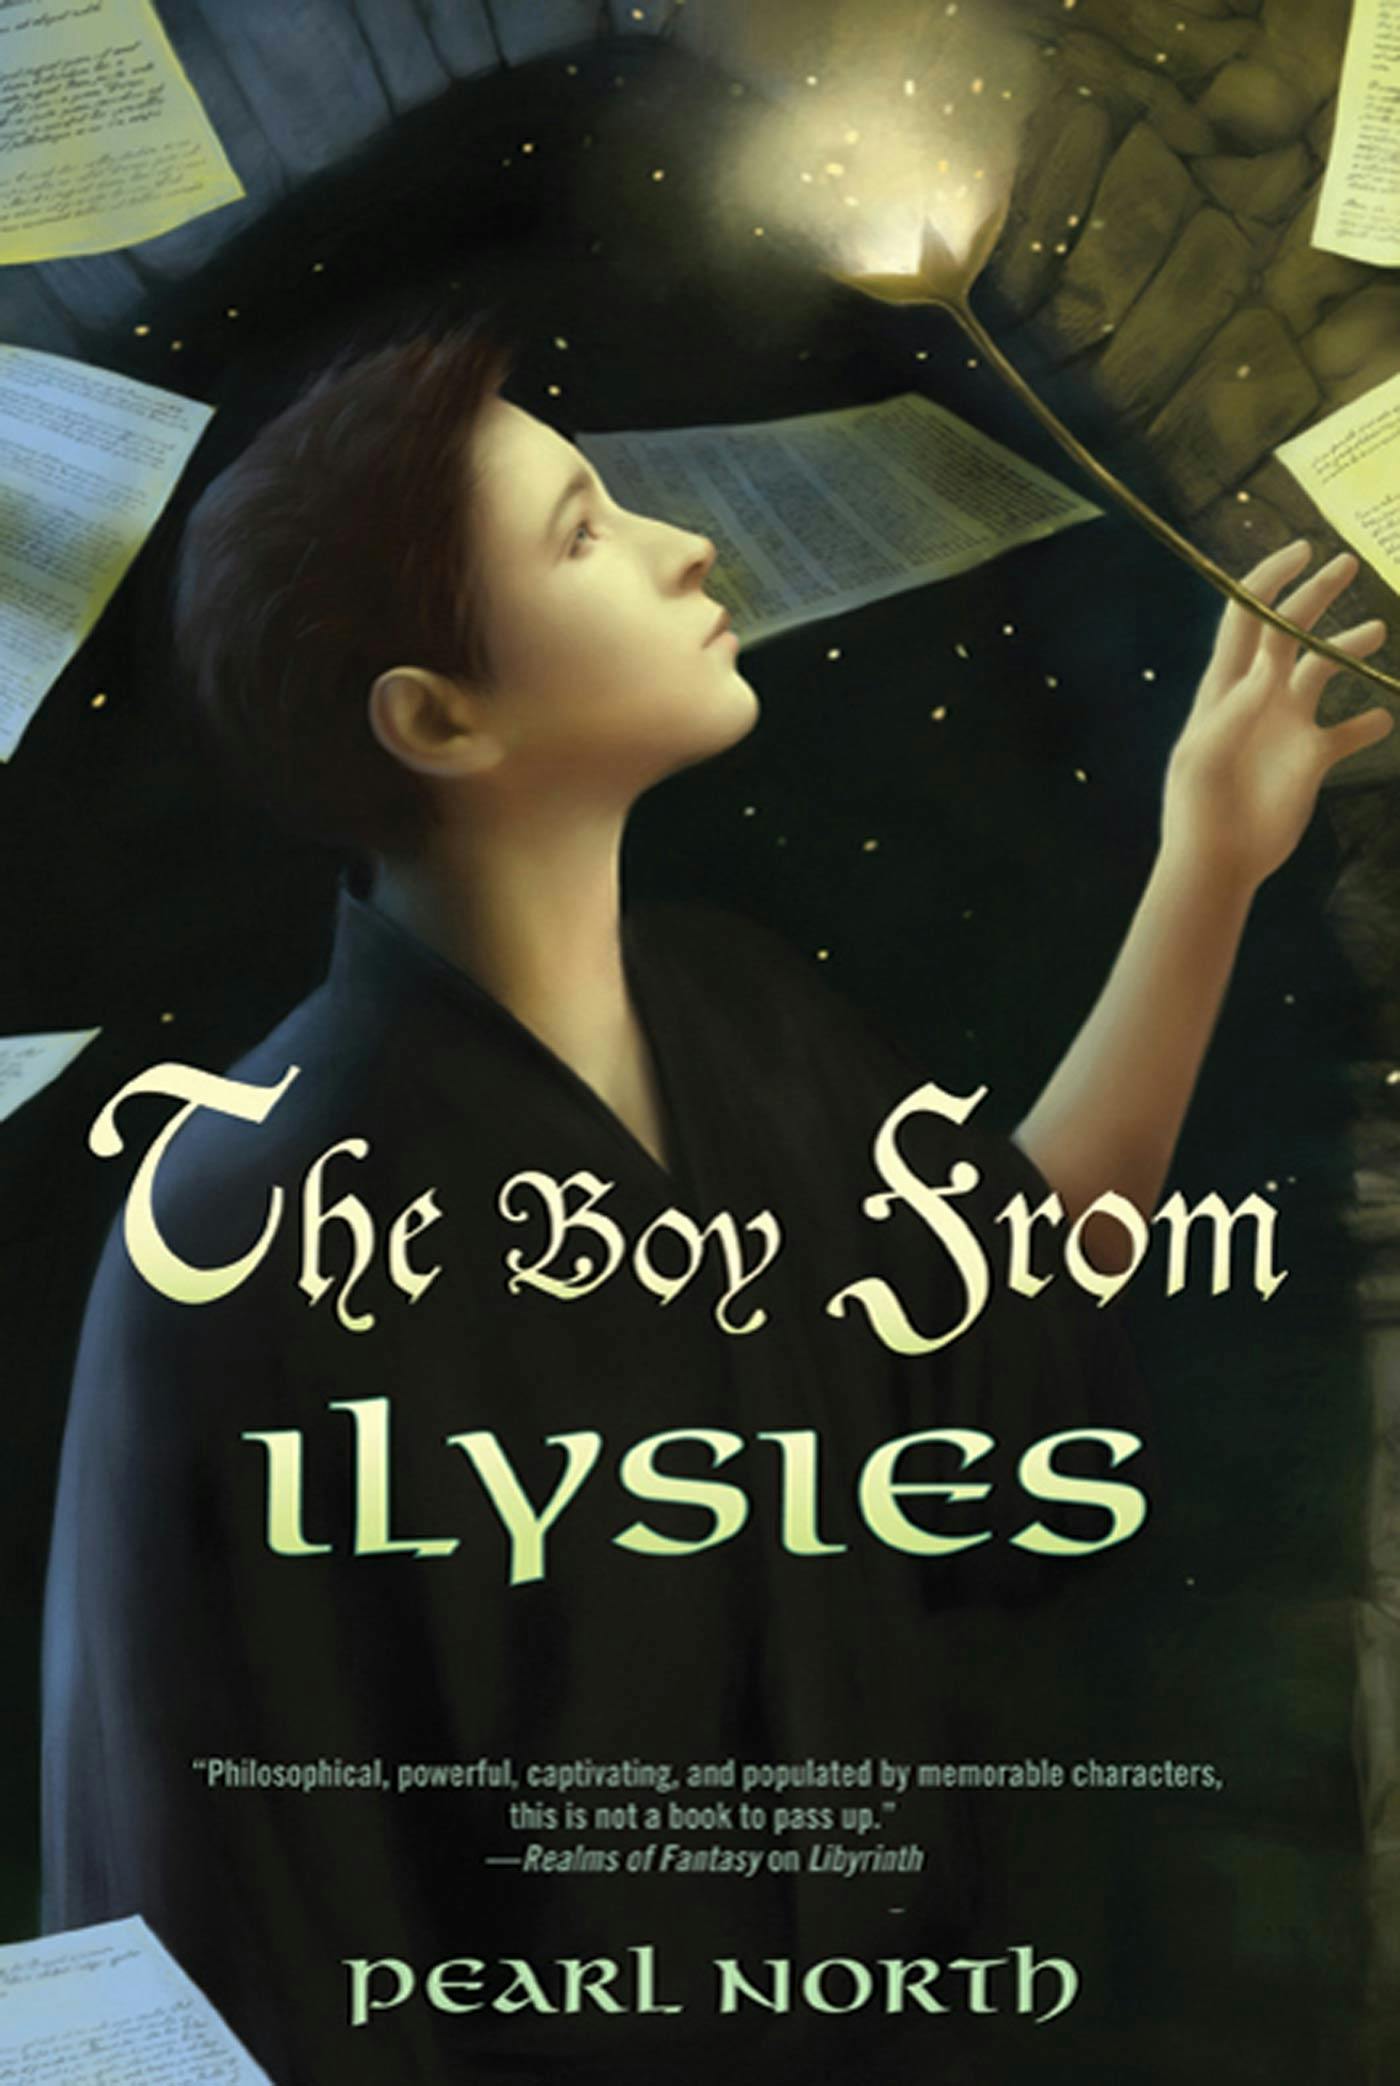 Cover for the book titled as: The Boy from Ilysies